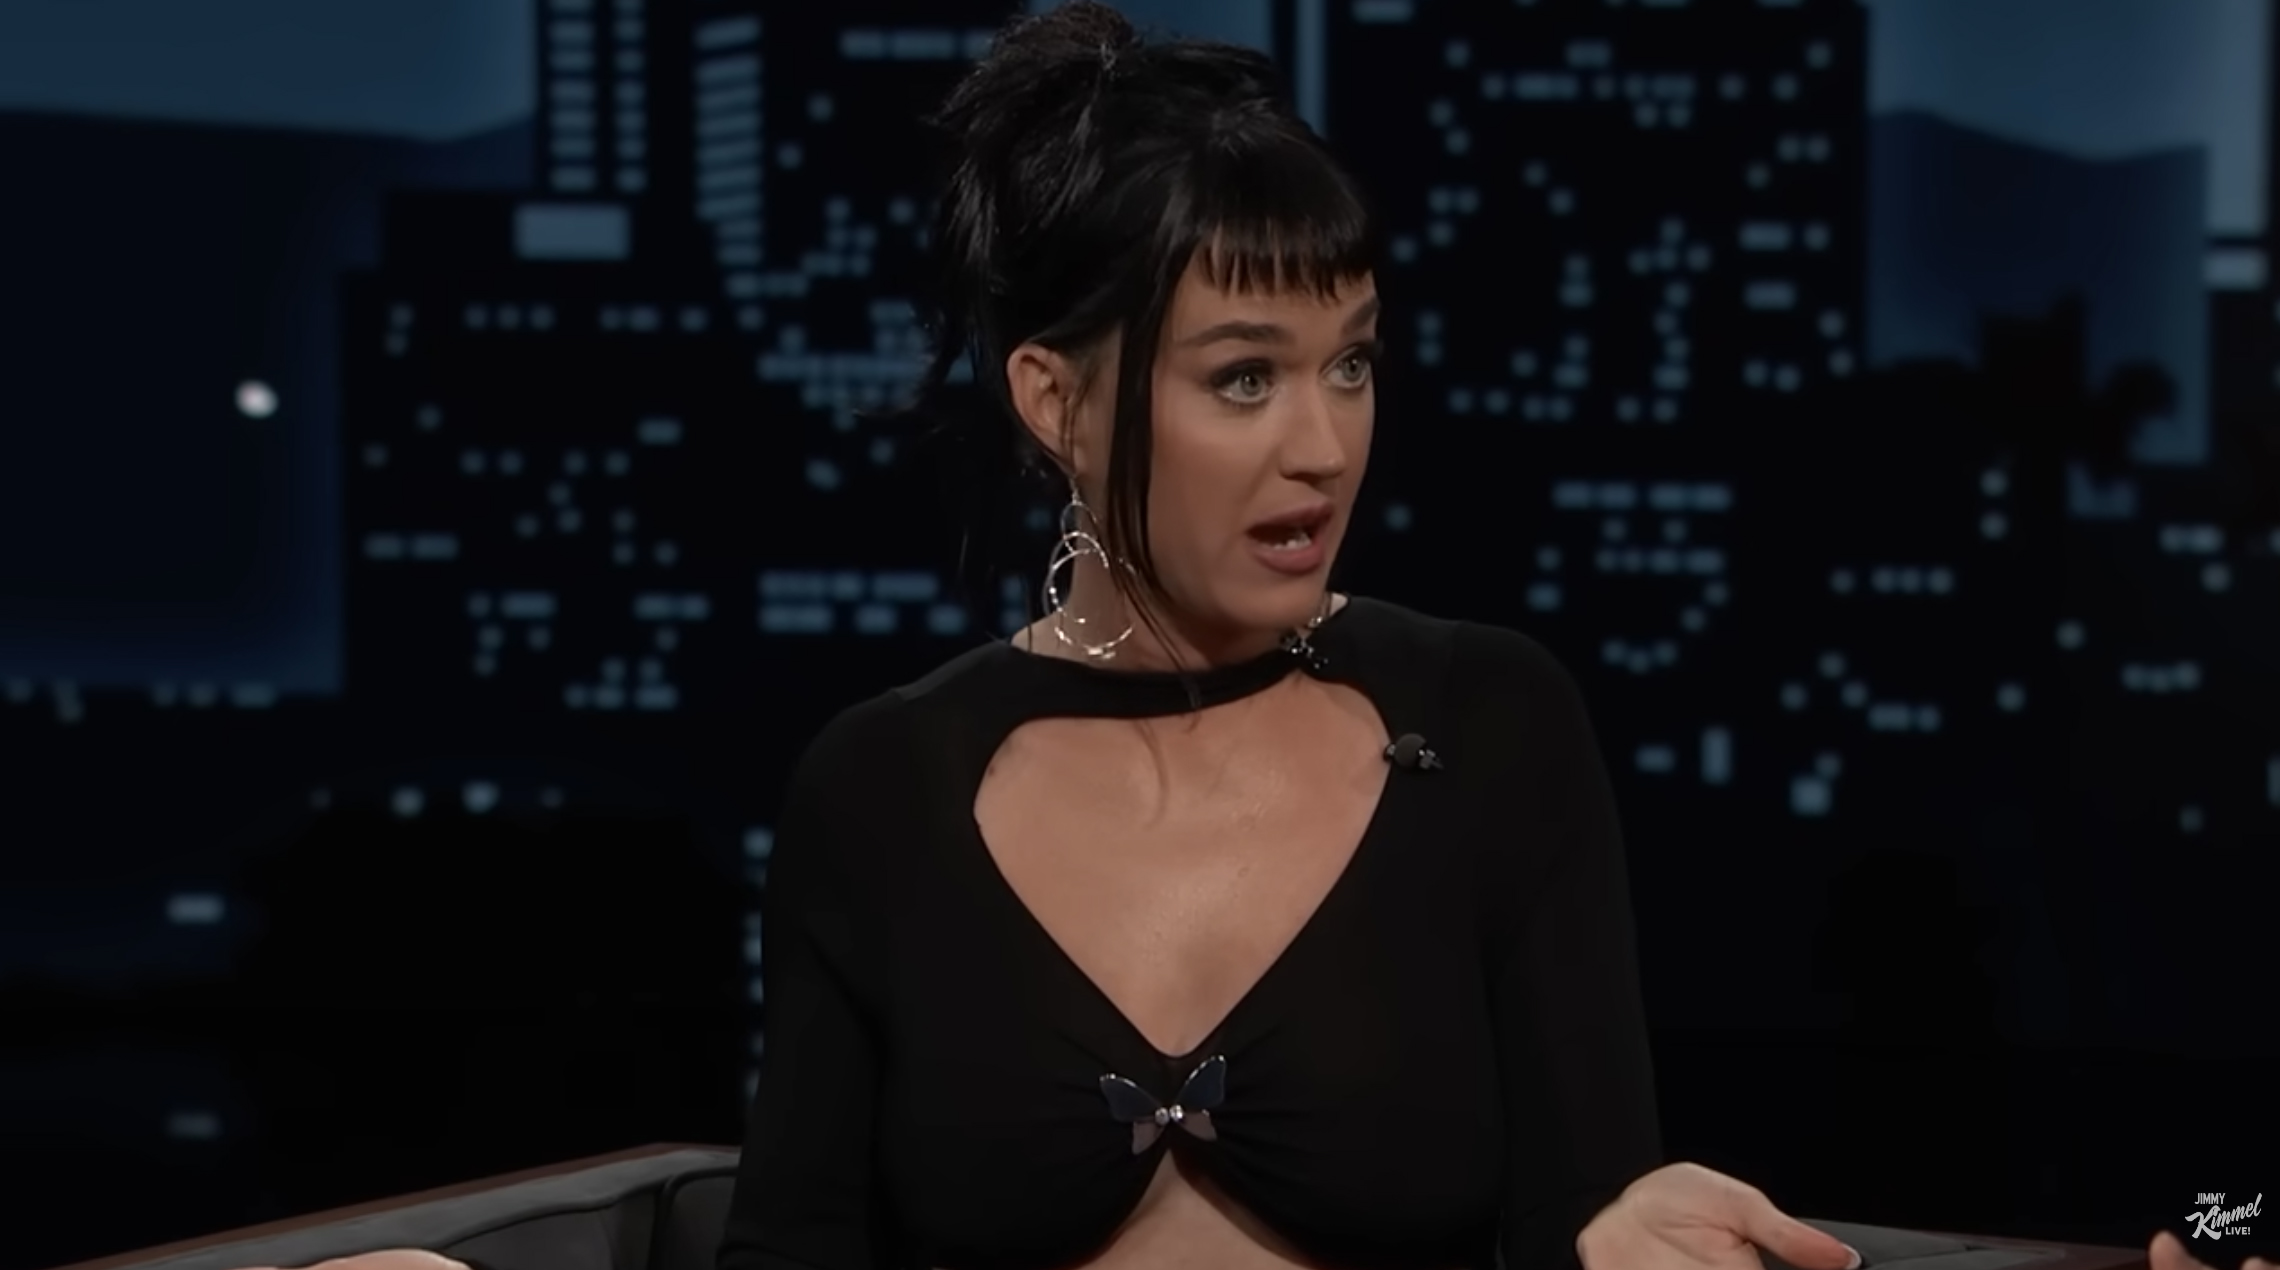 Katy announced her American Idol exit on Jimmy Kimmel Live